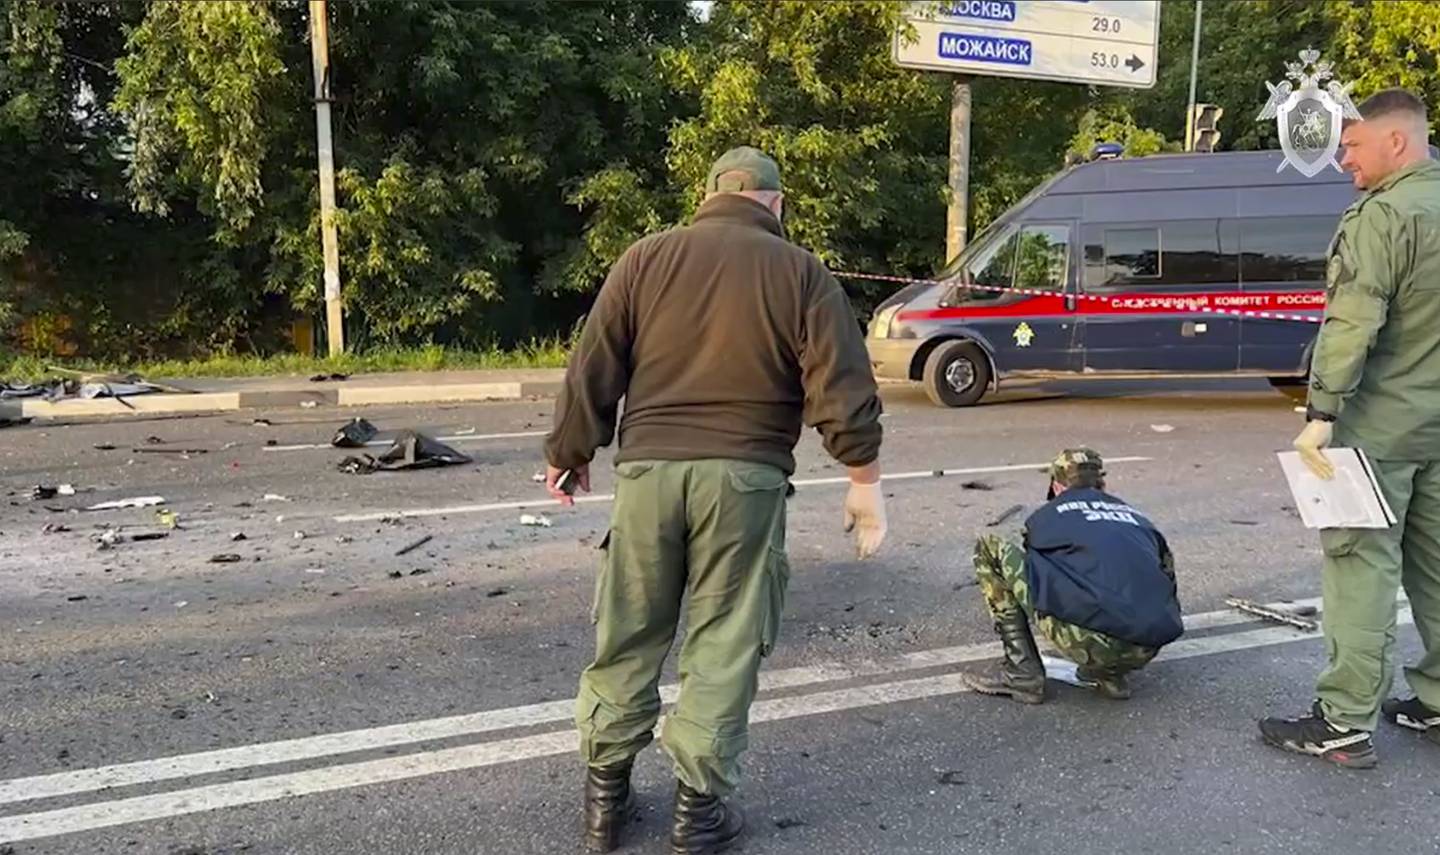 In this handout photo taken from video released by Investigative Committee of Russia on Sunday, Aug. 21, 2022, investigators work on the site of explosion of a car driven by Daria Dugina outside Moscow. Daria Dugina, the daughter of Alexander Dugin, the Russian nationalist ideologist often called "Putin's brain", was killed when her car exploded on the outskirts of Moscow, officials said Sunday. The Investigate Committee branch for the Moscow region said the Saturday night blast was caused by a bomb planted in the SUV driven by Daria Dugina.(Investigative Committee of Russia via AP)